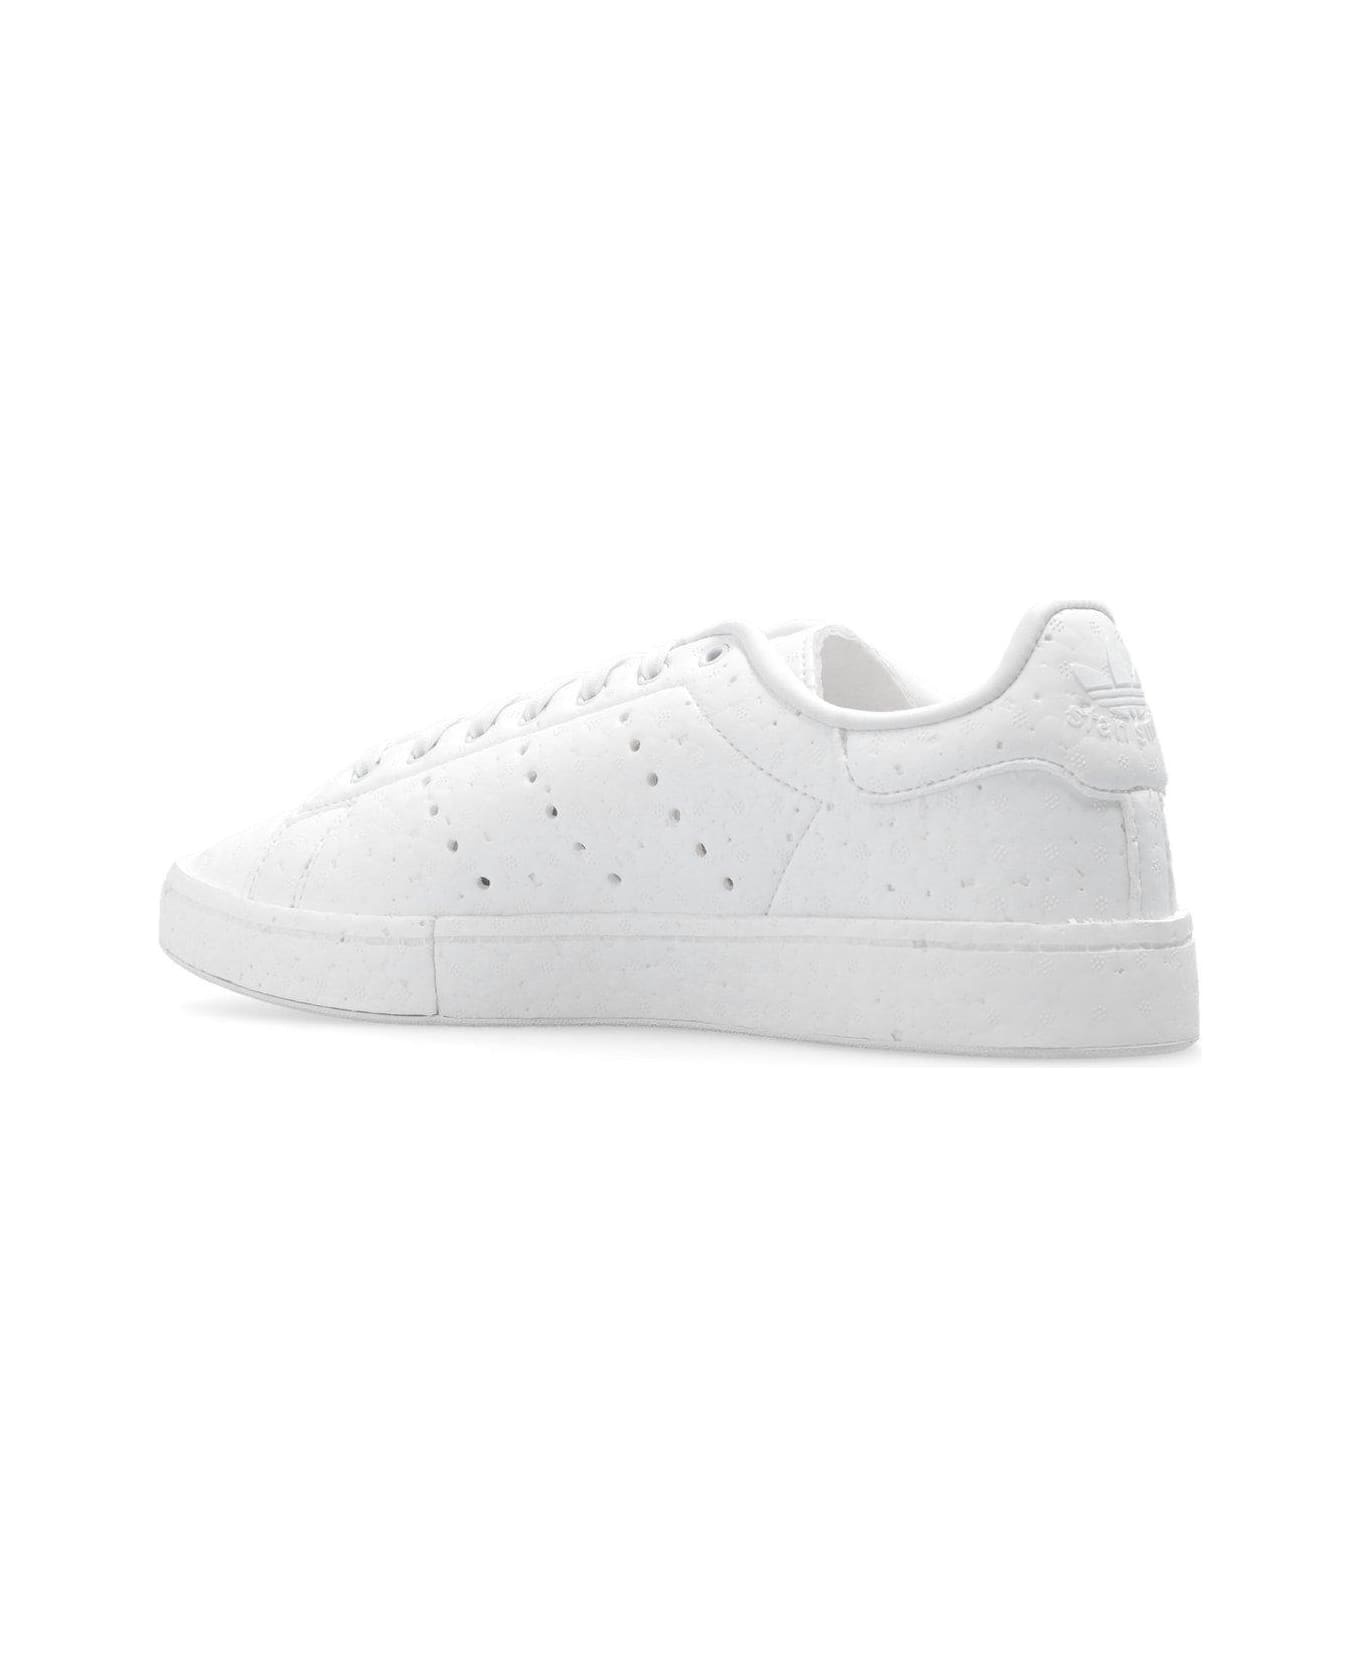 Adidas Originals by Craig Green X Craig Green Stan Smith Lace-up Sneakers - WHITE